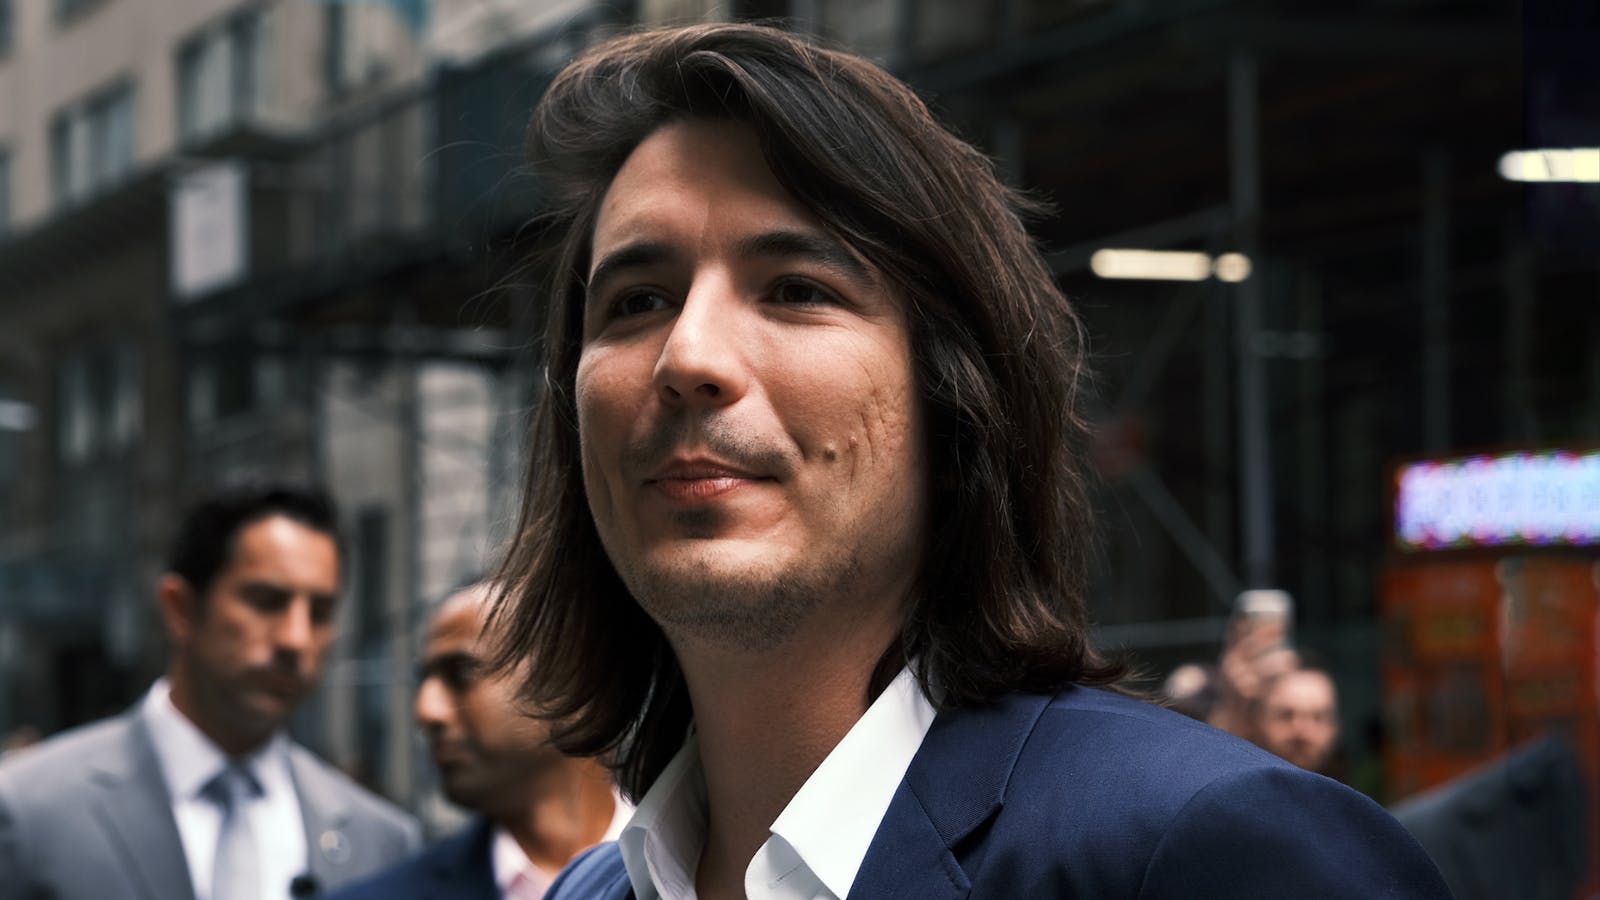 Robinhood CEO Vlad Tenev. Photo by Getty Images.